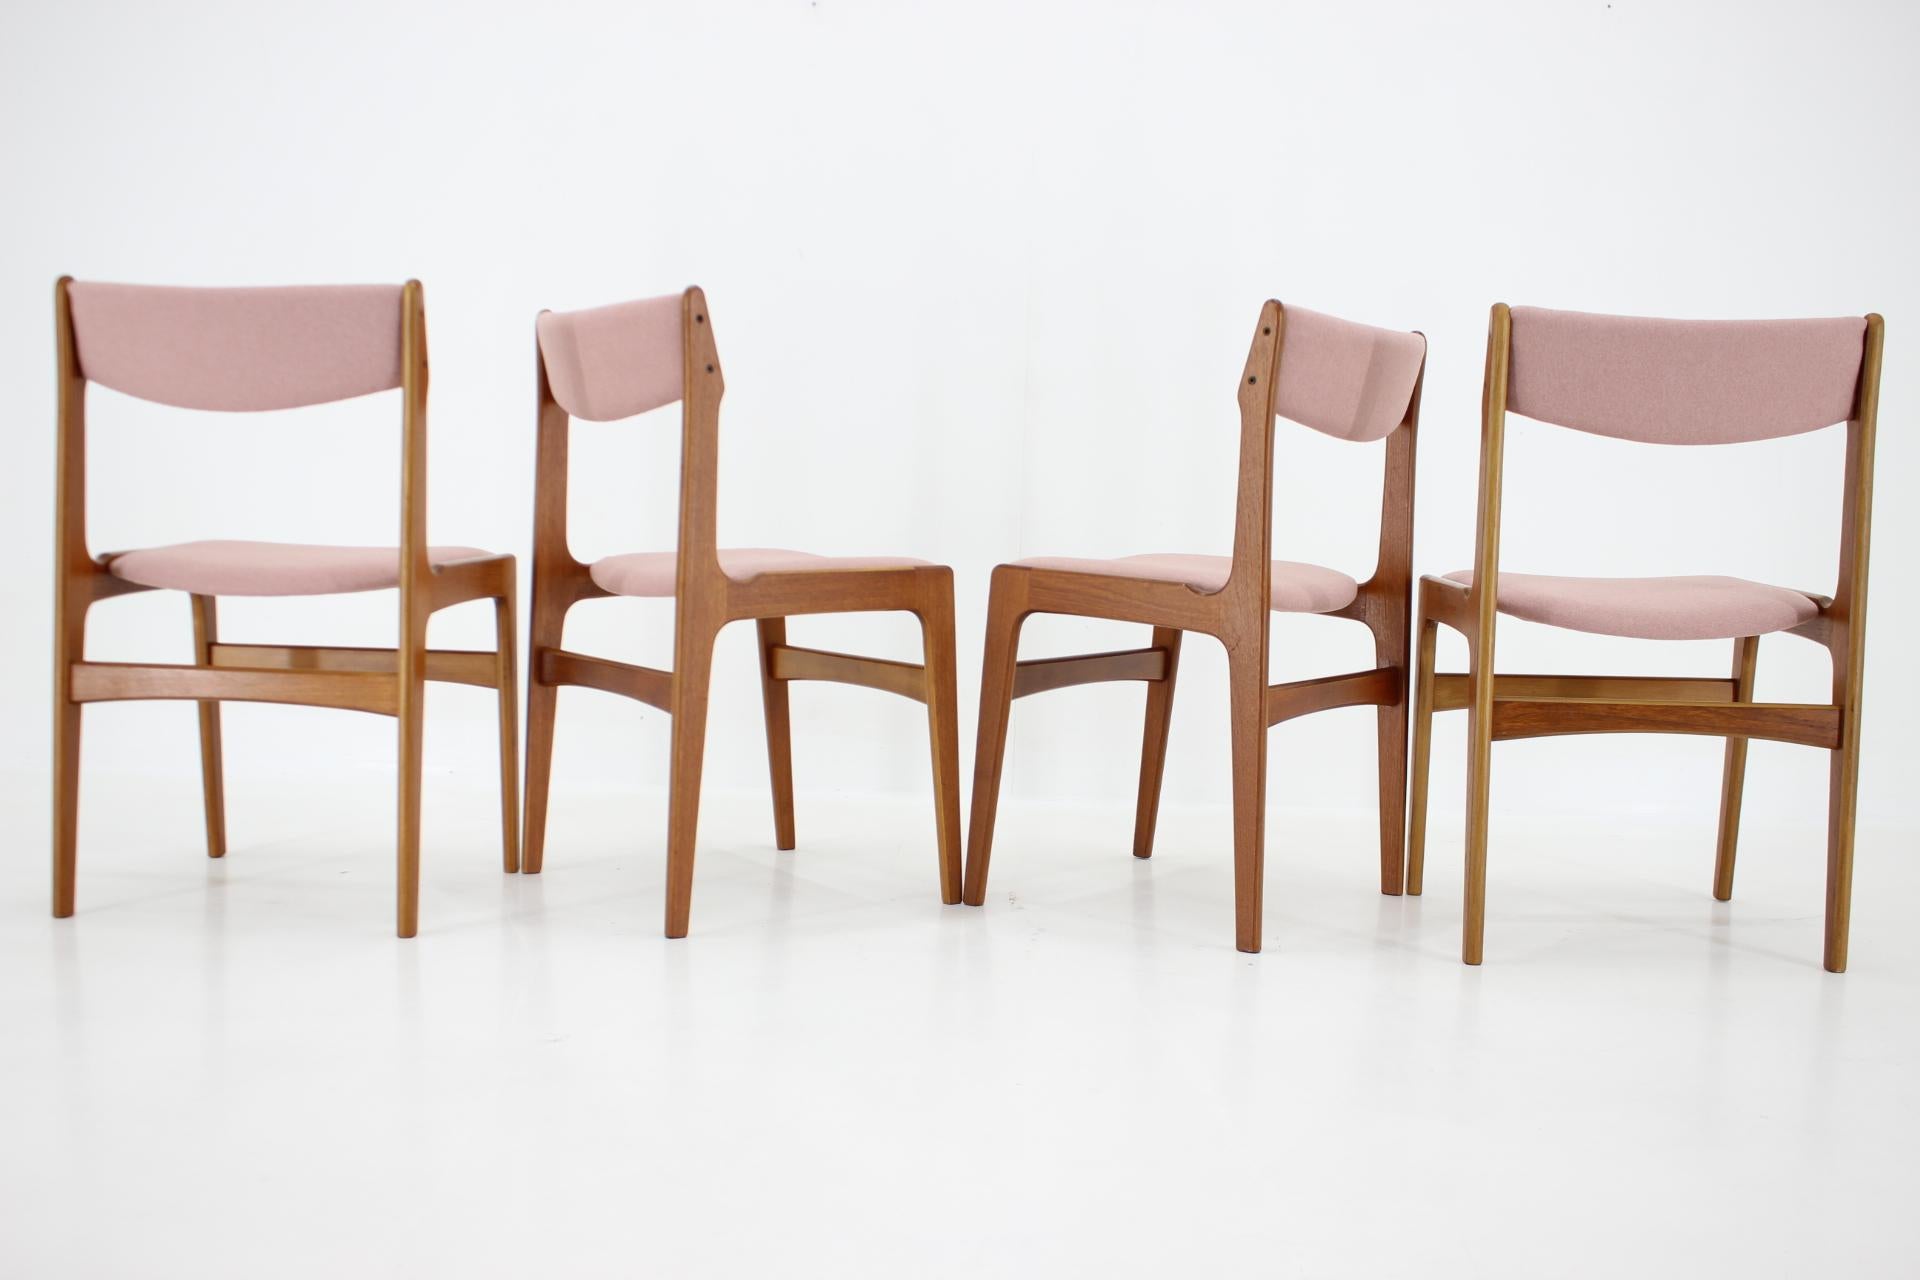 Mid-20th Century 1960s Set of Four Teak Dining Chairs, Denmark